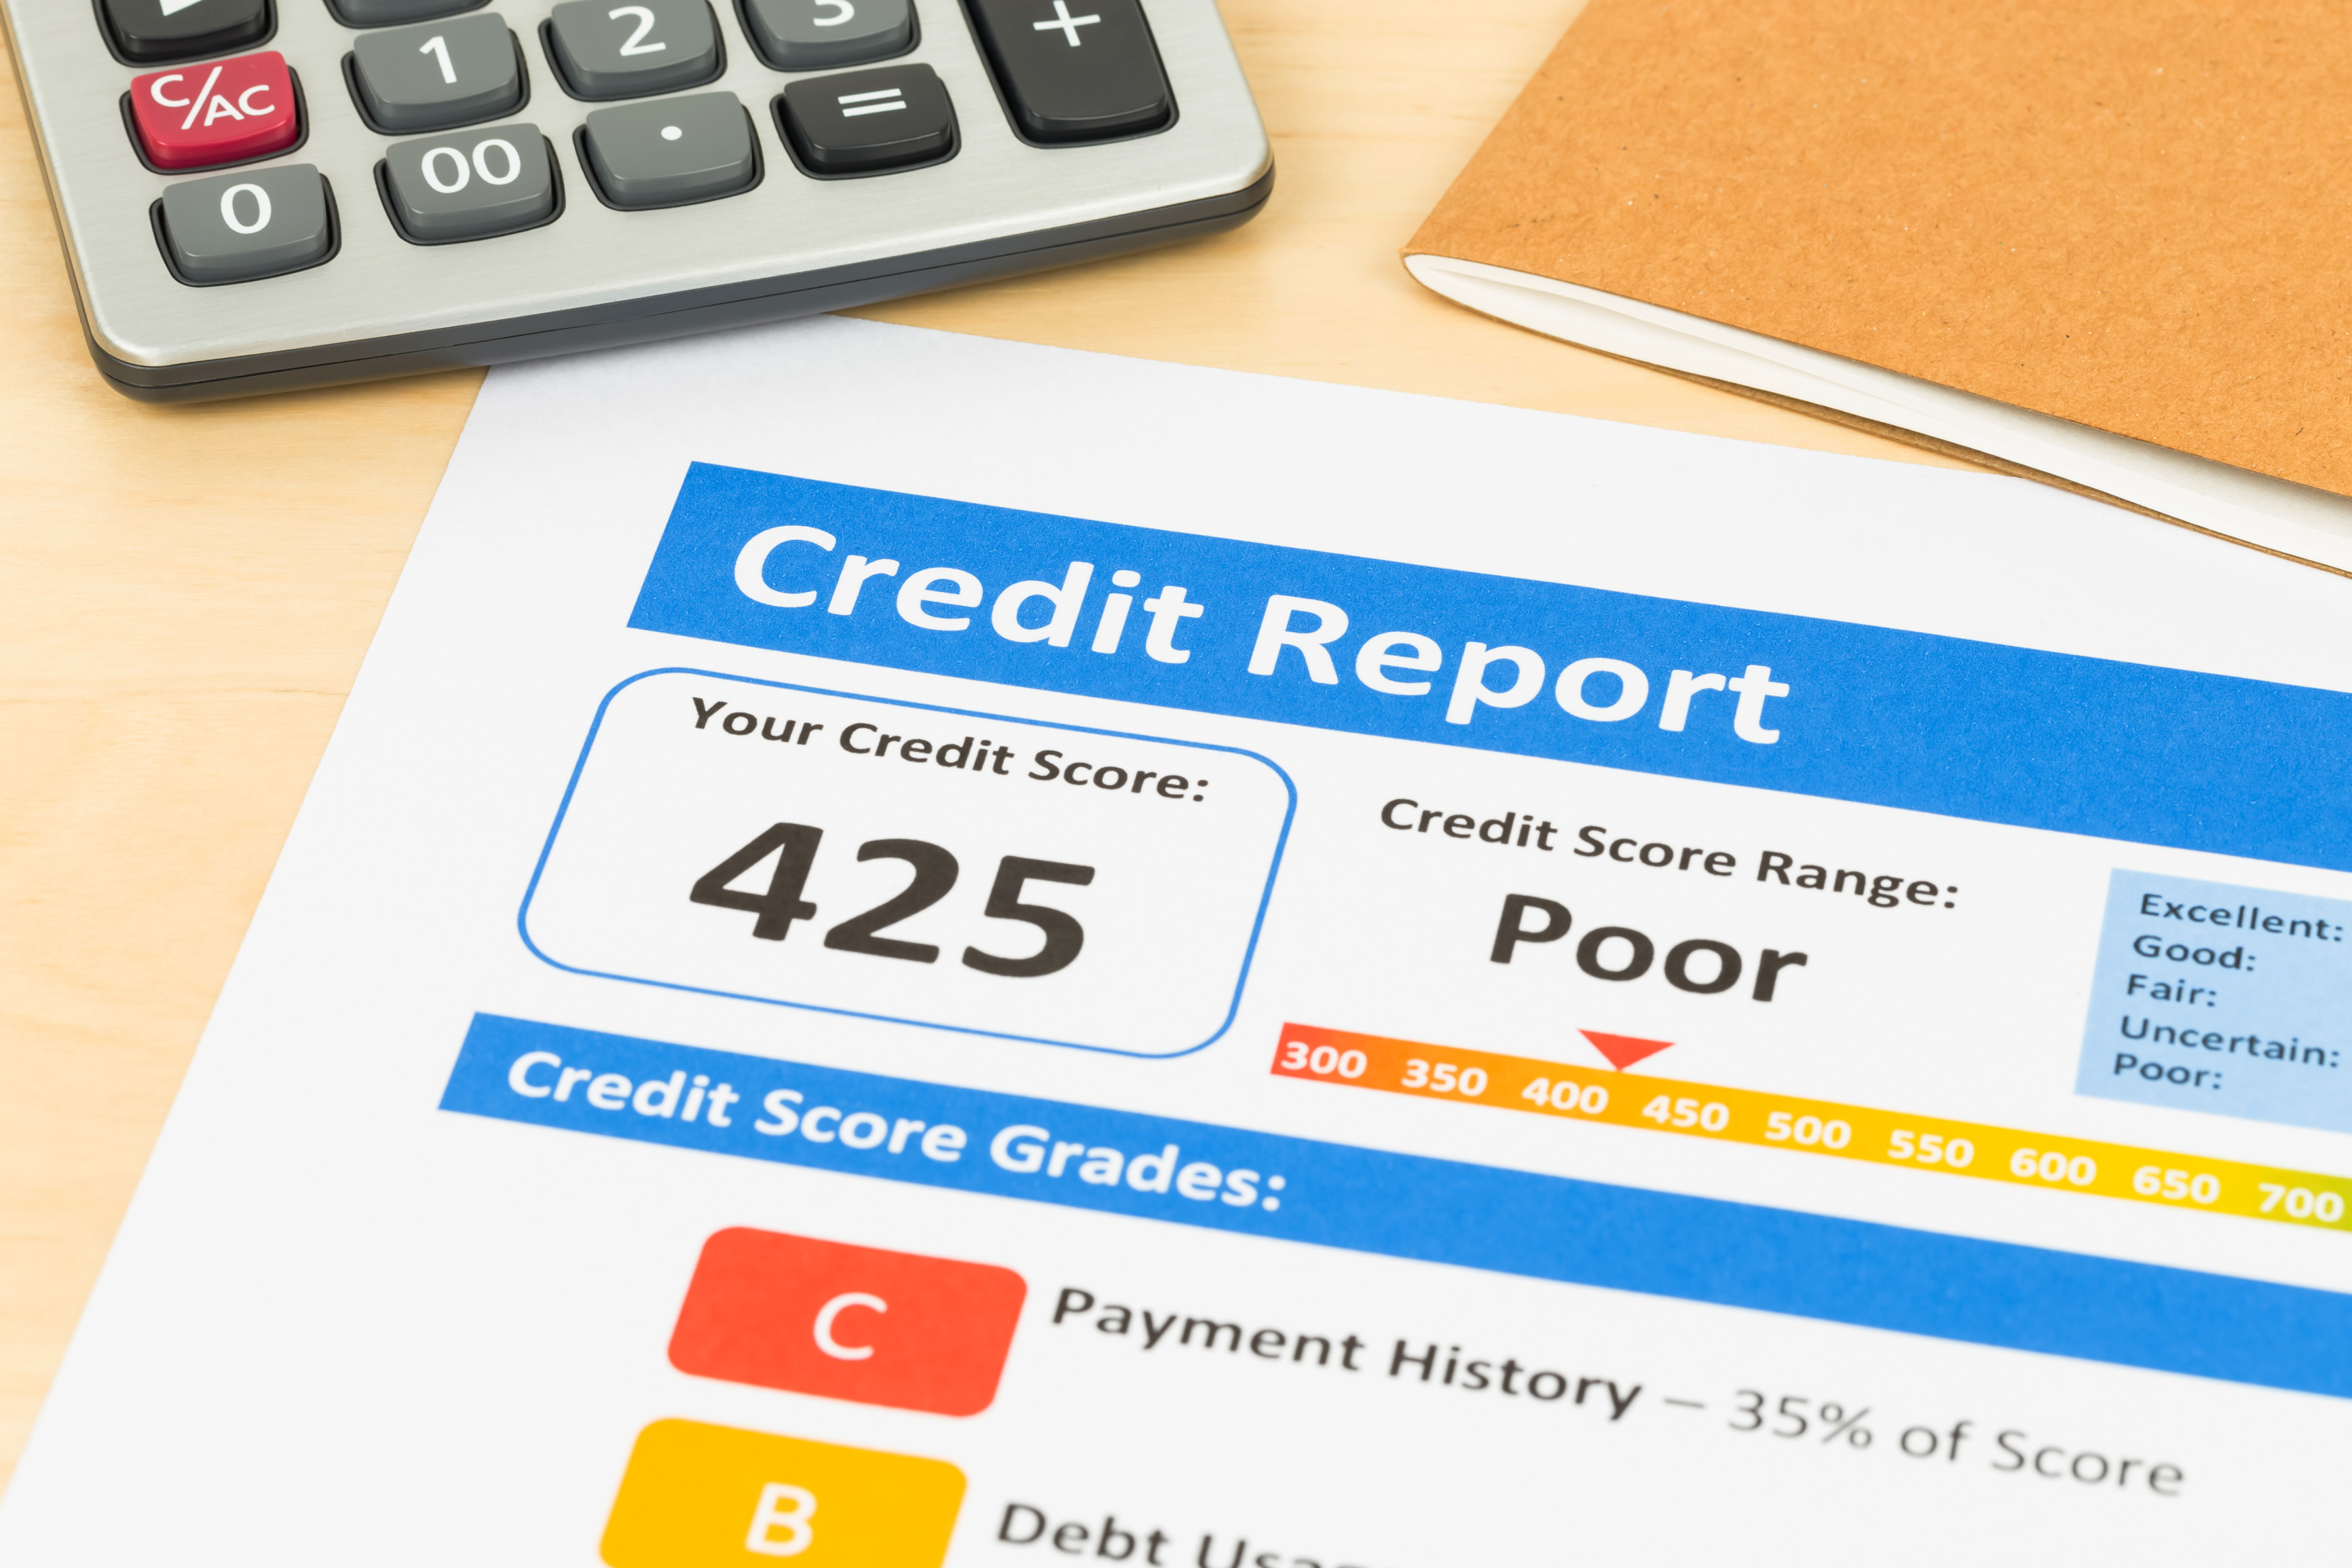 What is the Fair Credit Reporting Act (FCRA)?